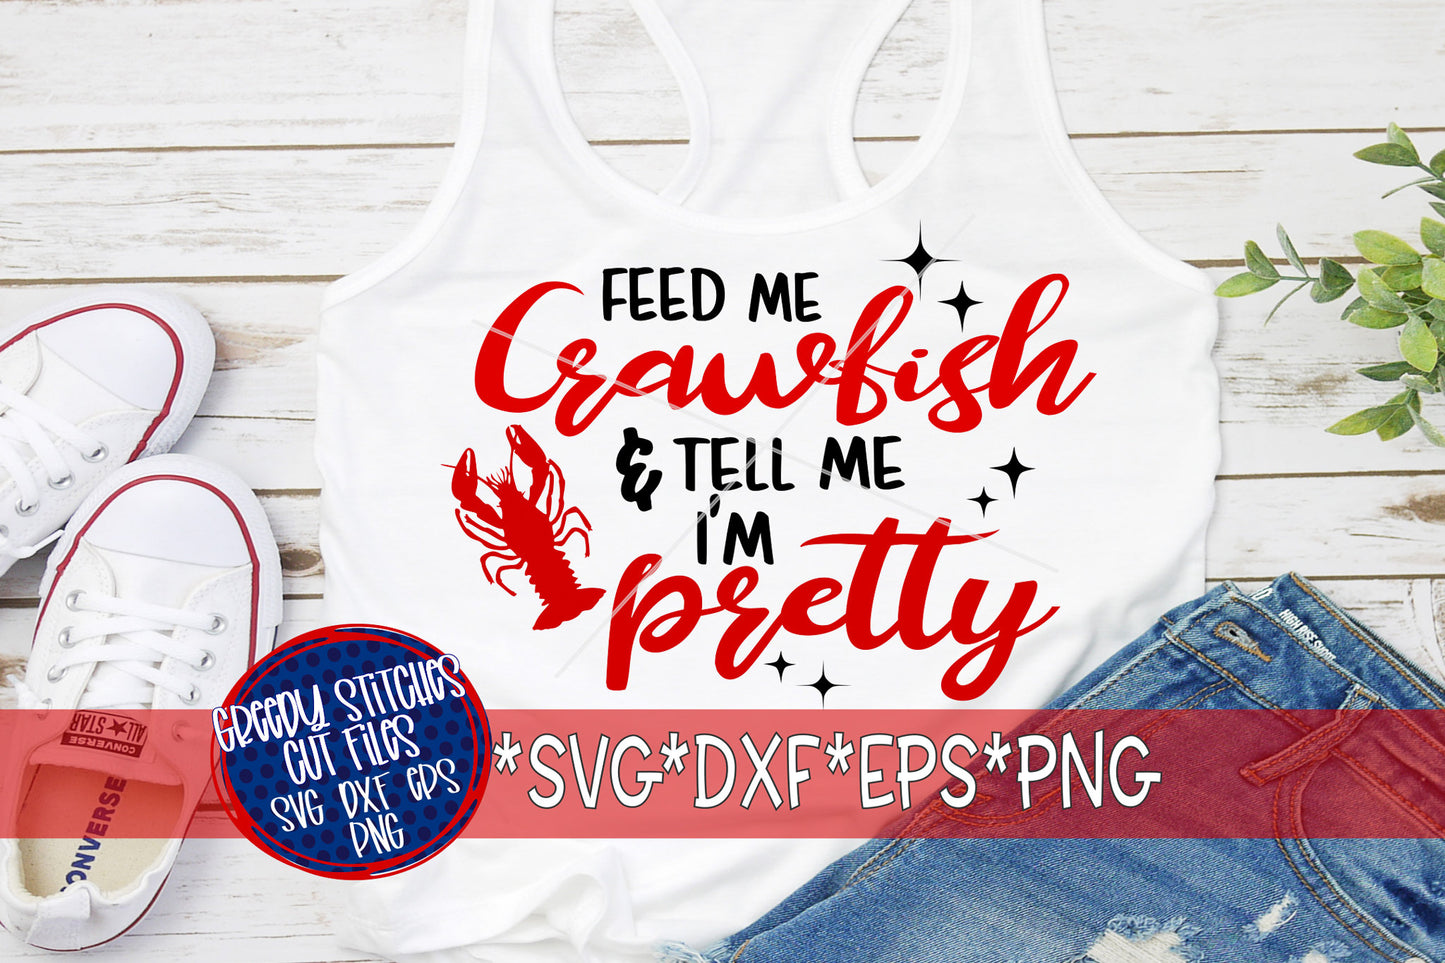 Feed Me Crawfish & Tell Me I&#39;m Pretty. svg, dxf,, eps, png. Crawfish SvG | Feed Me Crawfish SvG | Tell Me I&#39;m Pretty SvG | Instant Download